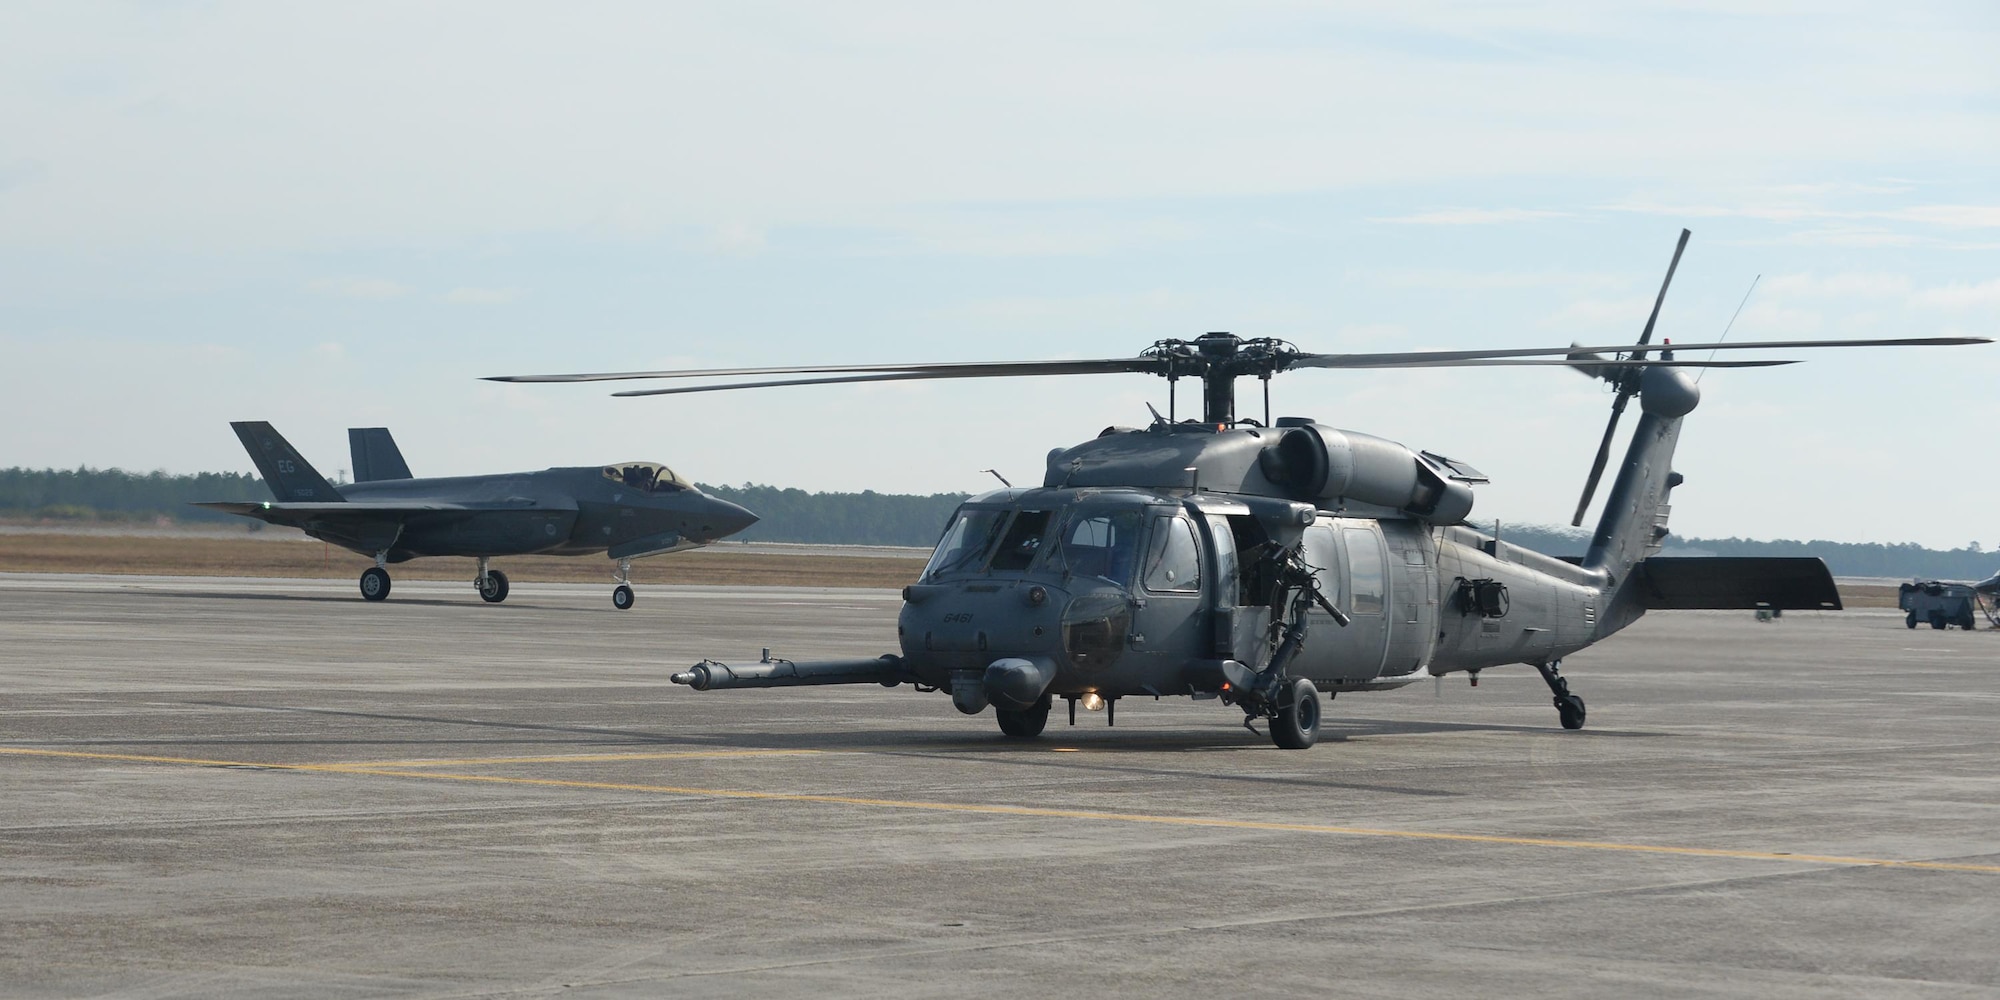 A U.S. Air Force 66th Rescue Squadron HH-60G Pave Hawk waits to takeoff as an F-35 Lightning II taxies down the runway at Tyndall Air Force Base, Fla., Dec. 8, 2016. Pave Hawks from the 66th RQS, Nellis Air Force Base, Nevada, came to Tyndall for Checkered Flag 17-1. (U.S. Air Force photo by Airman 1st Class Cody R. Miller/Released)